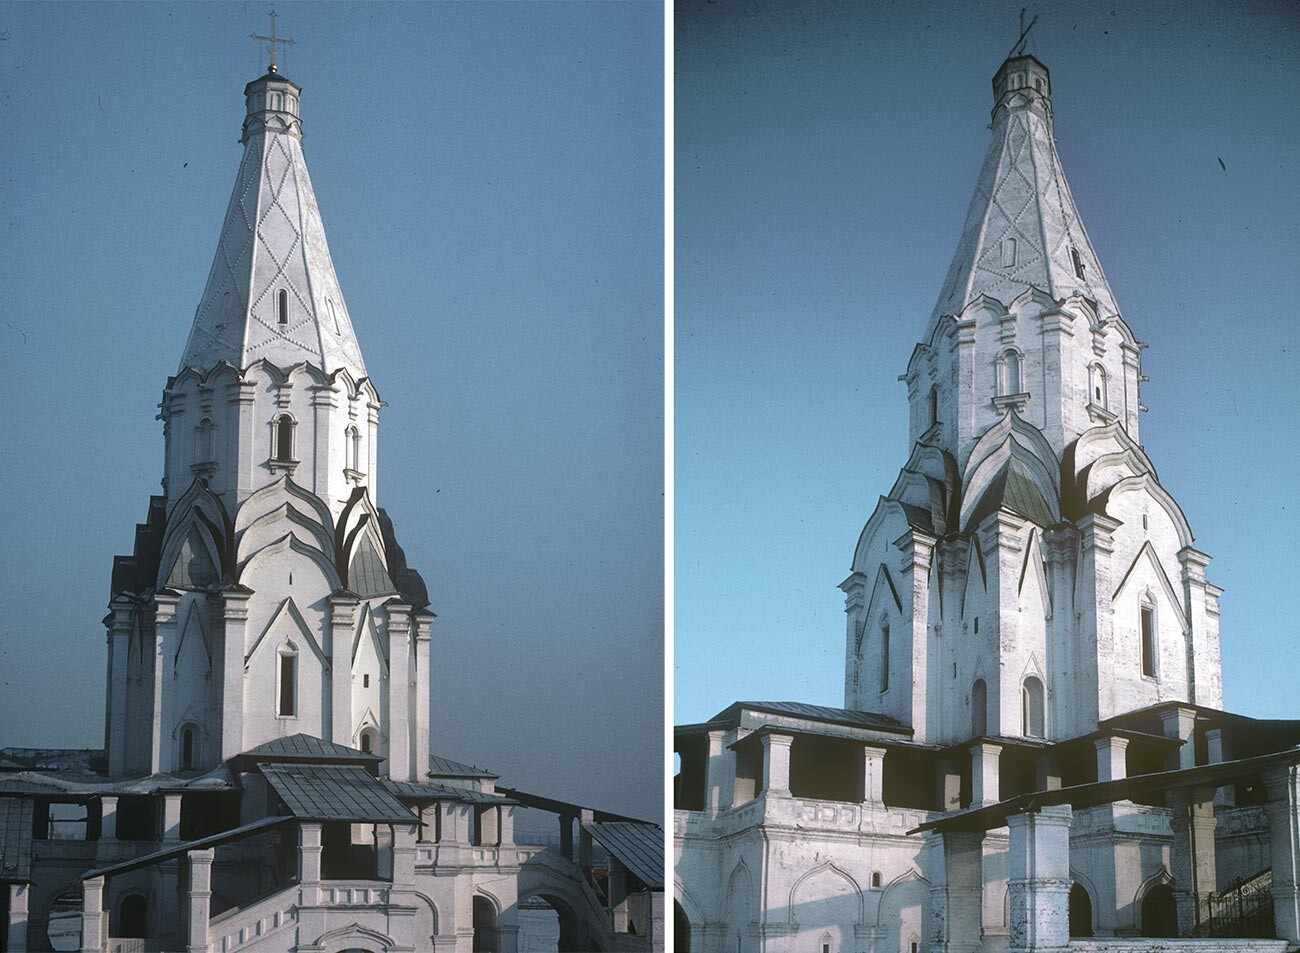 Left: Church of the Ascension. West view. March 29, 1980.
Right: Southwest view. January 13, 1984.